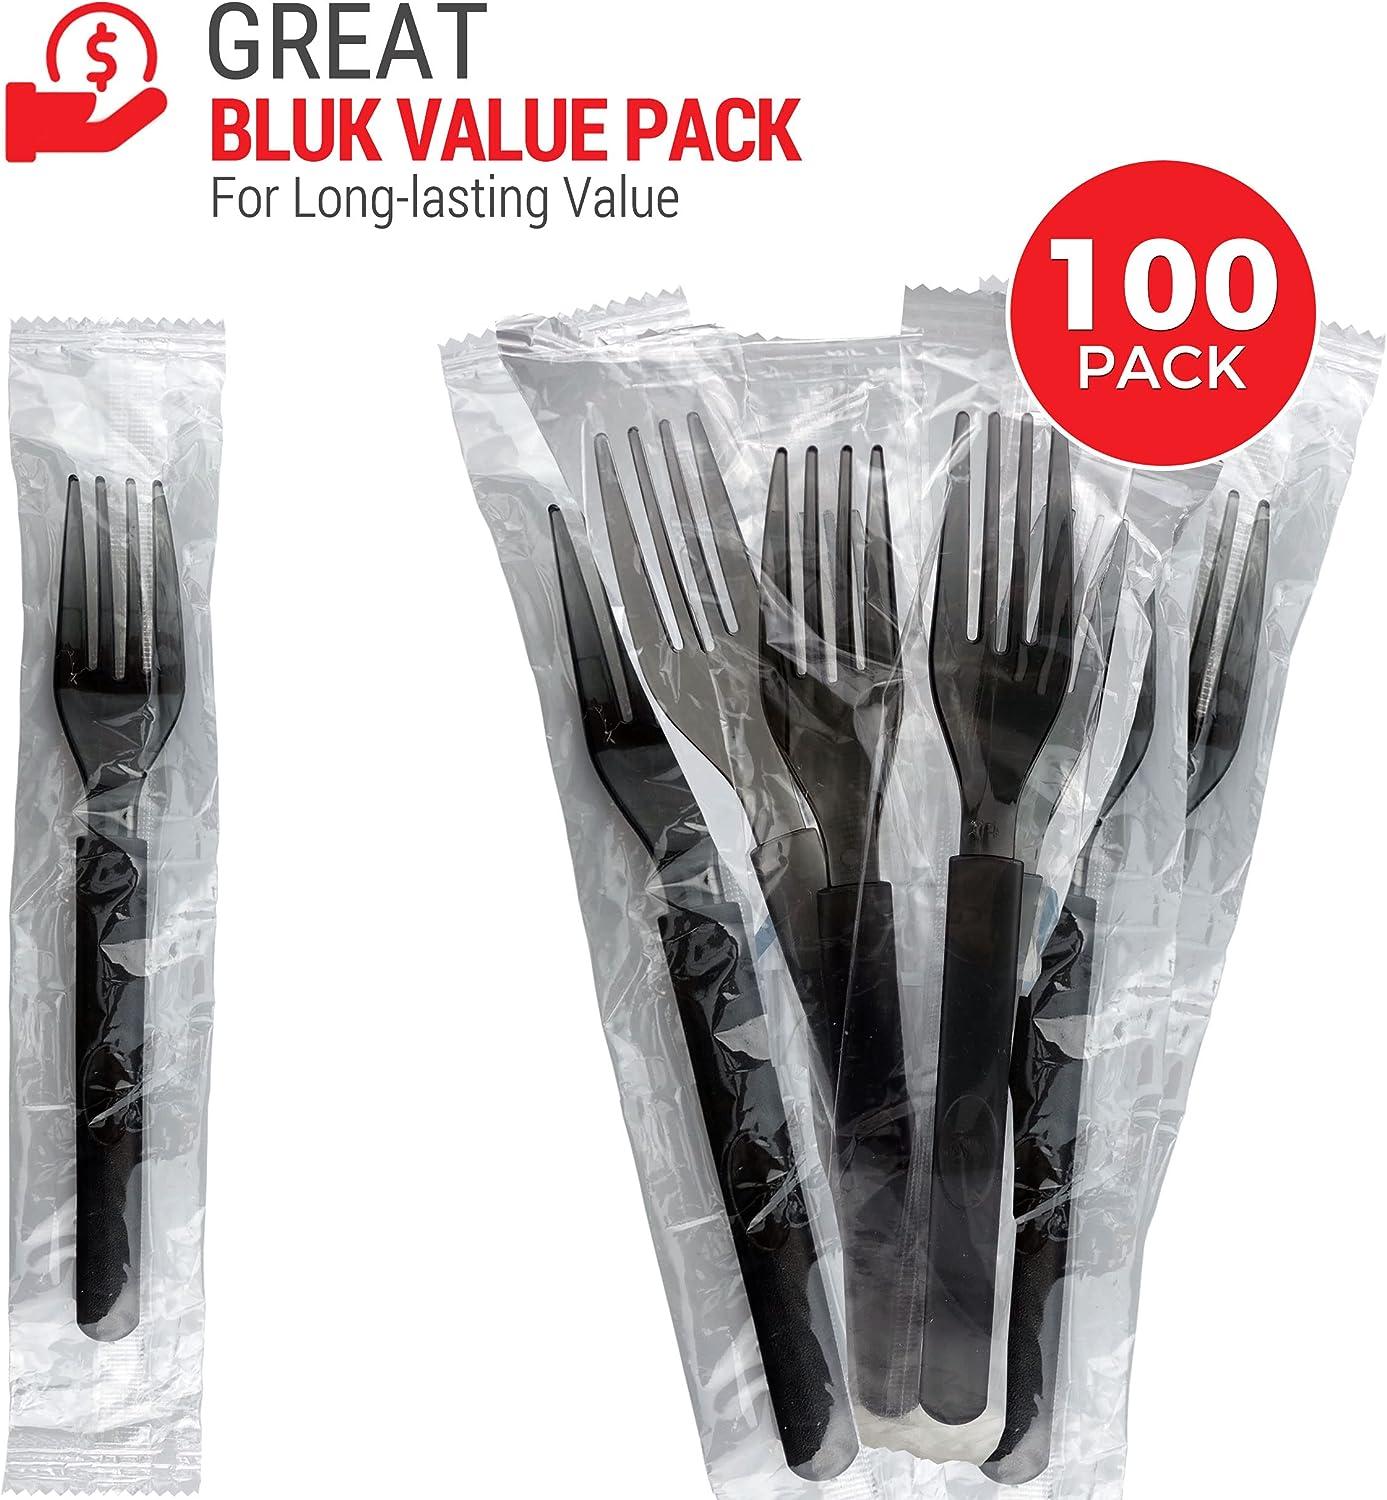 Clear Plastic Forks, 100 Count: Heavy Duty and Disposable Utensils, Great for Parties, Picnics, Office & School